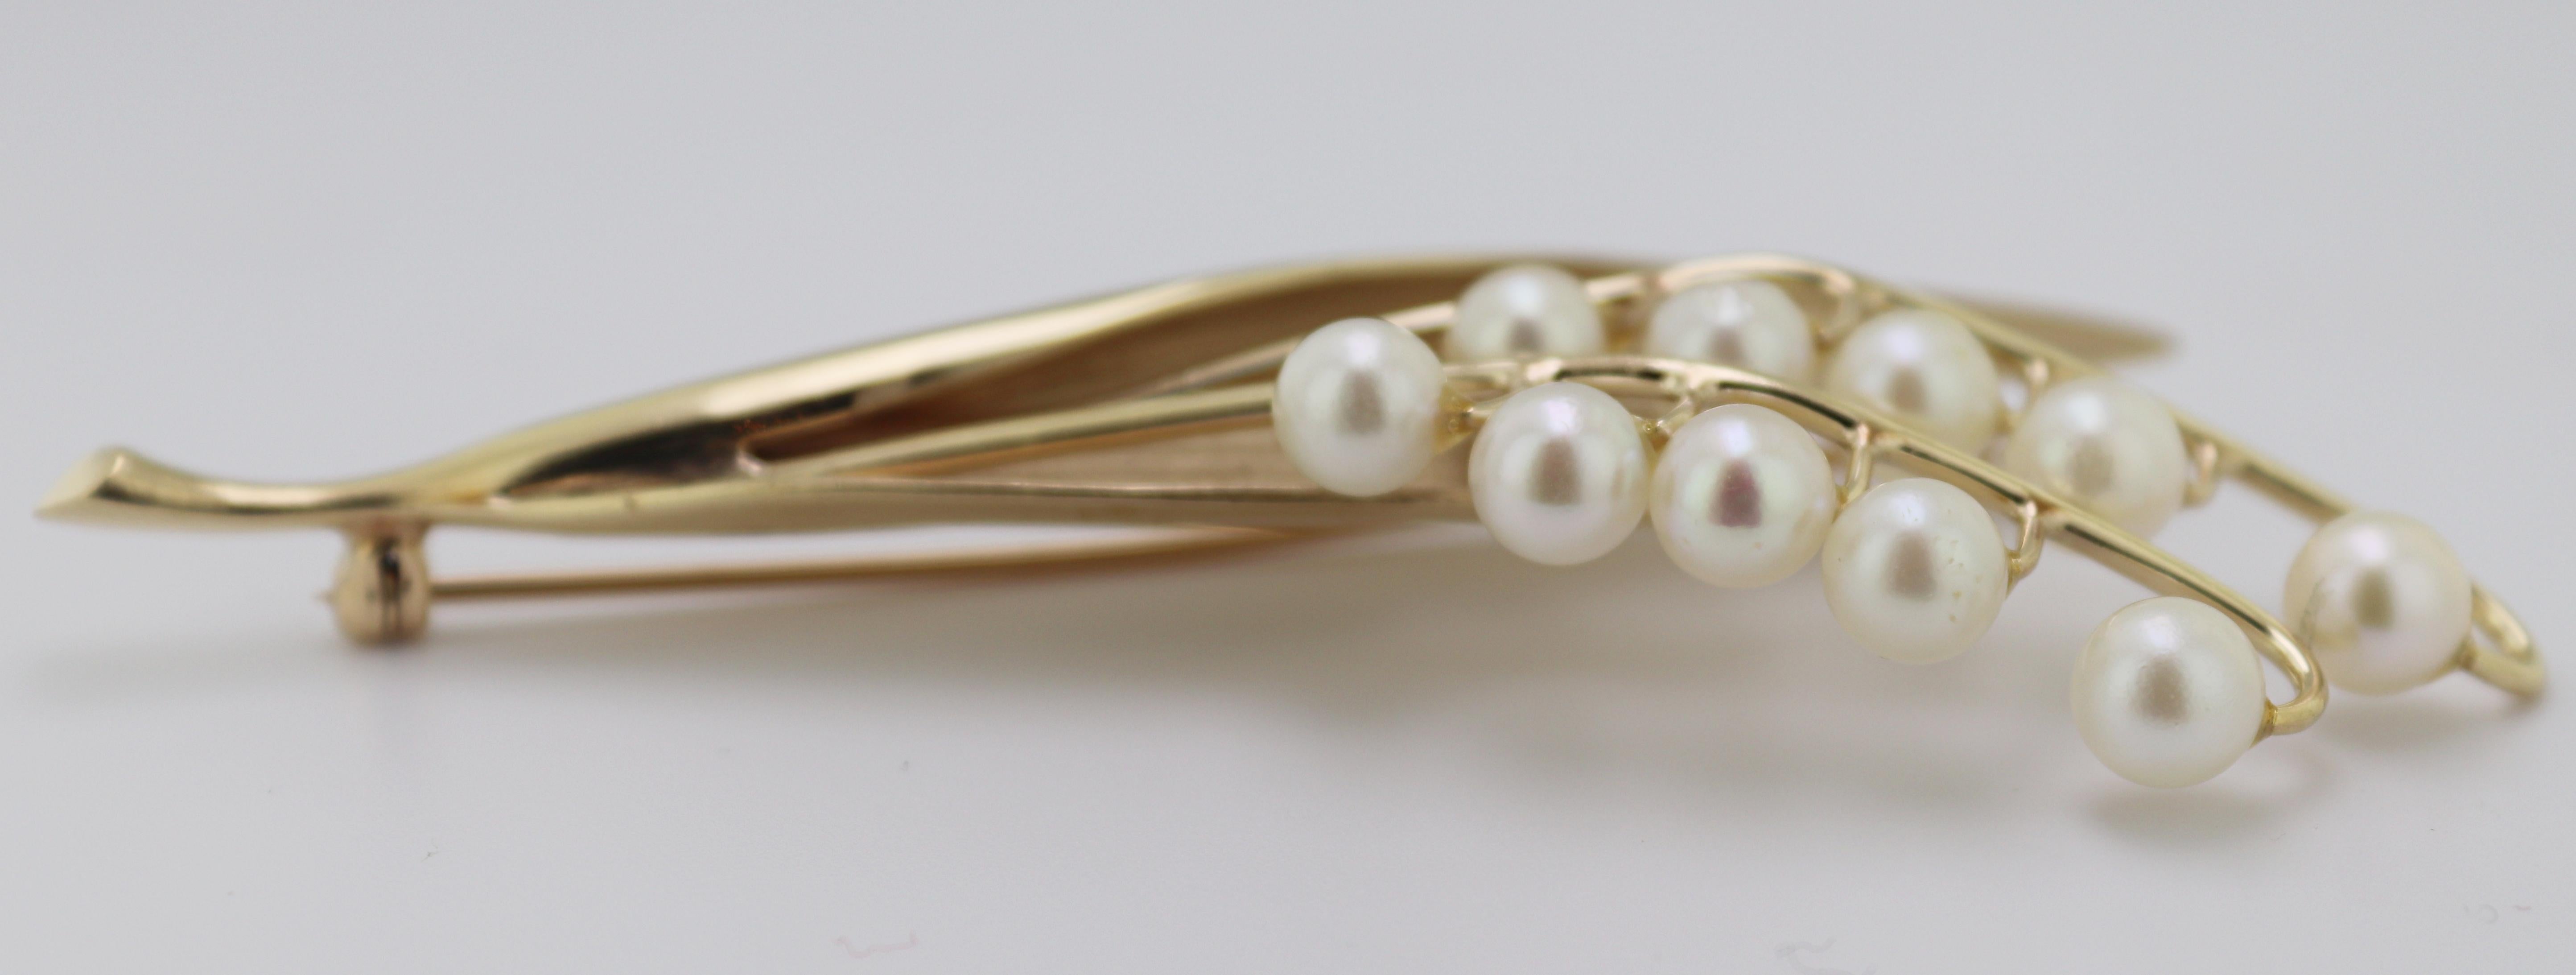 Round Cut Cultured Pearl, Yellow Gold ”Lilly of the Valley” Brooch